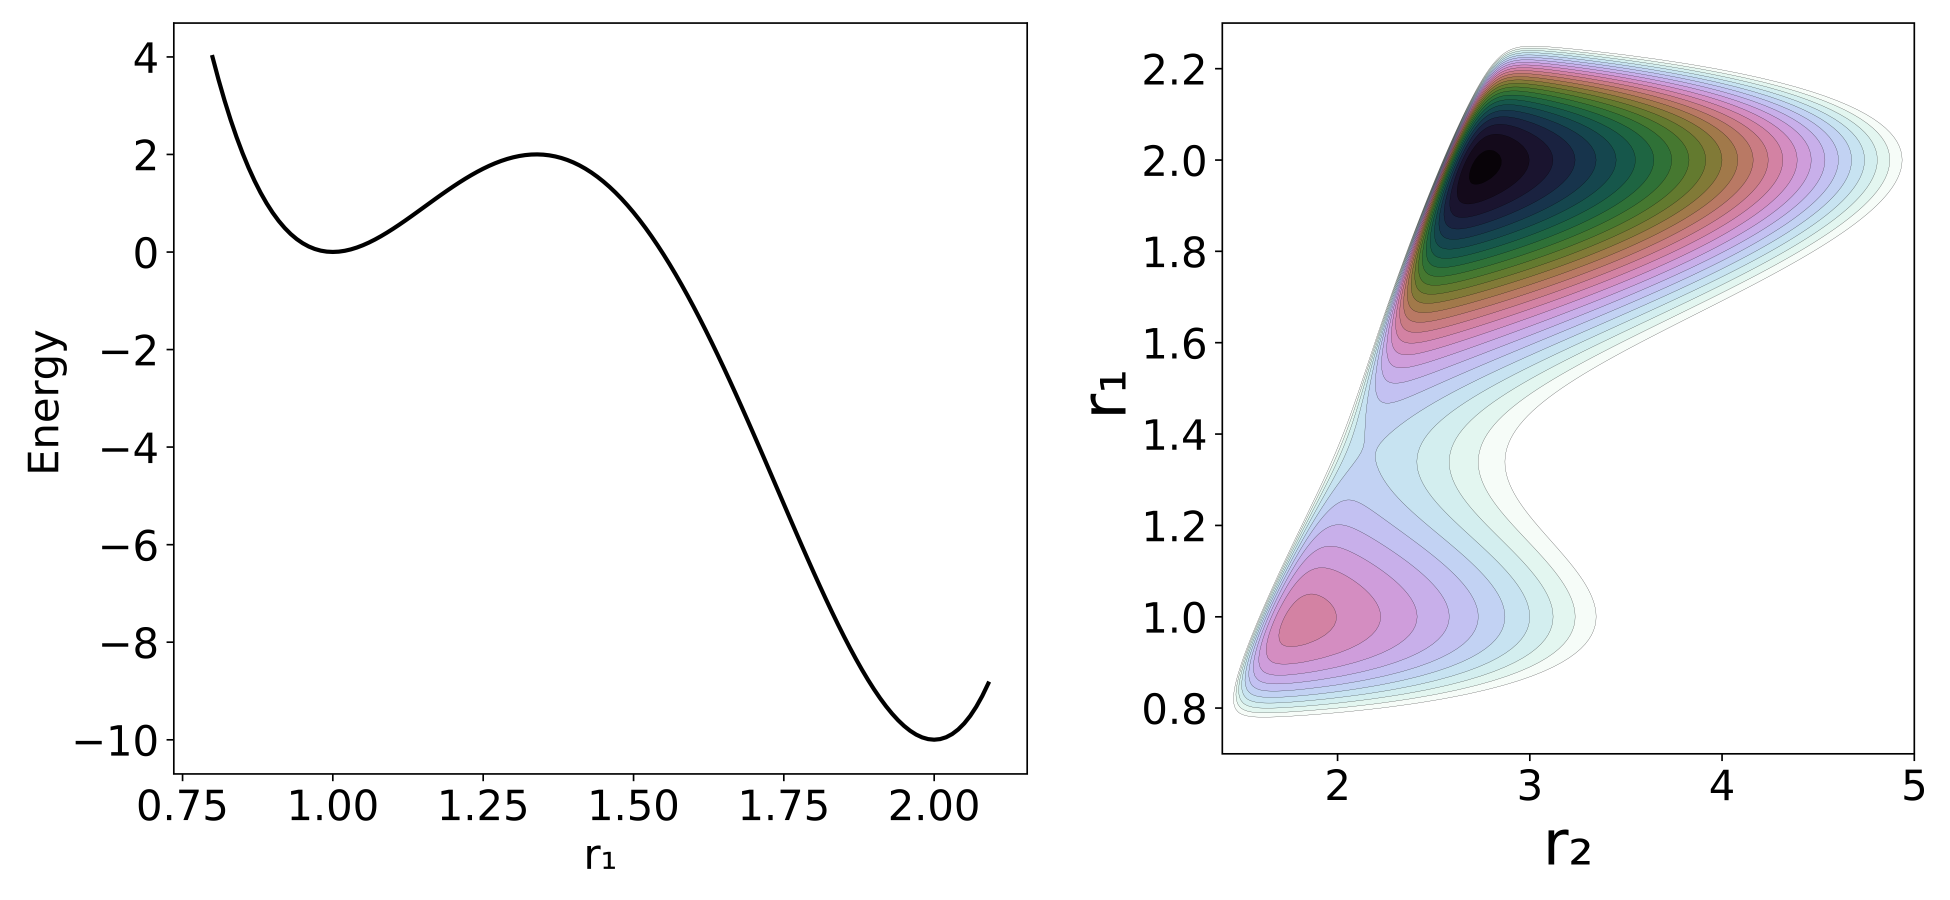 (Left) Reactive system's potential energy profile. (Right) Contours of the full potential energy surface. The contours are depicted in the $-7 \leq V \leq 6$ interval. 